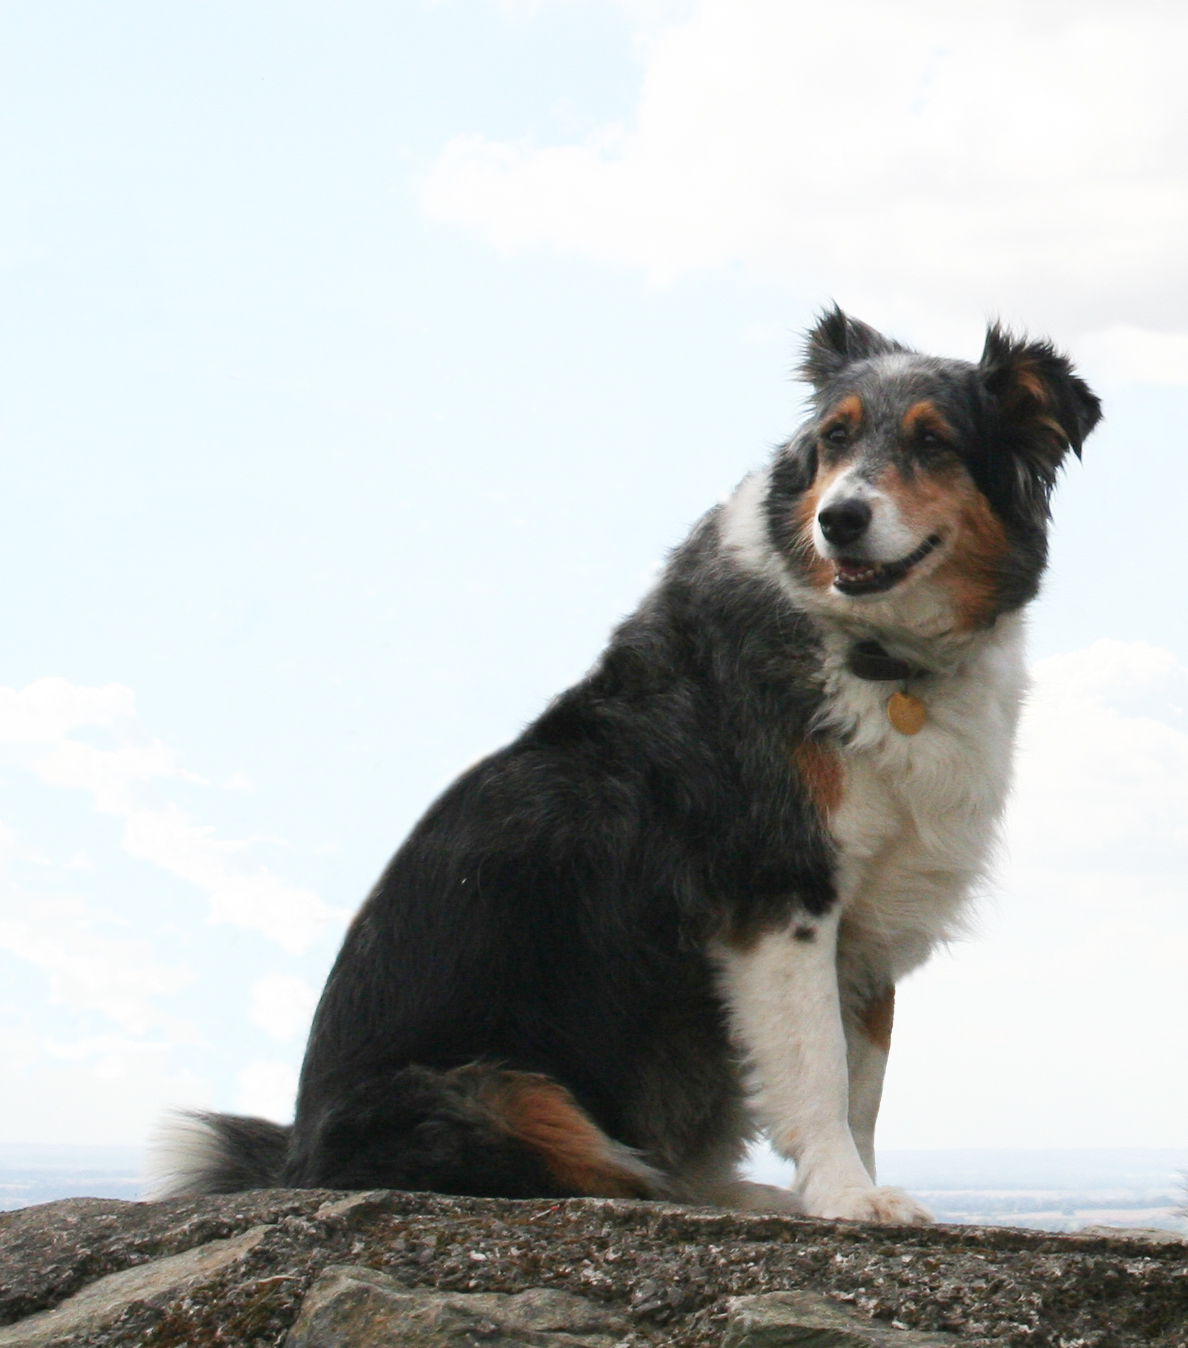 Misty on Bardon Hill Monument.  Misty died March 2012, she is greatly missed